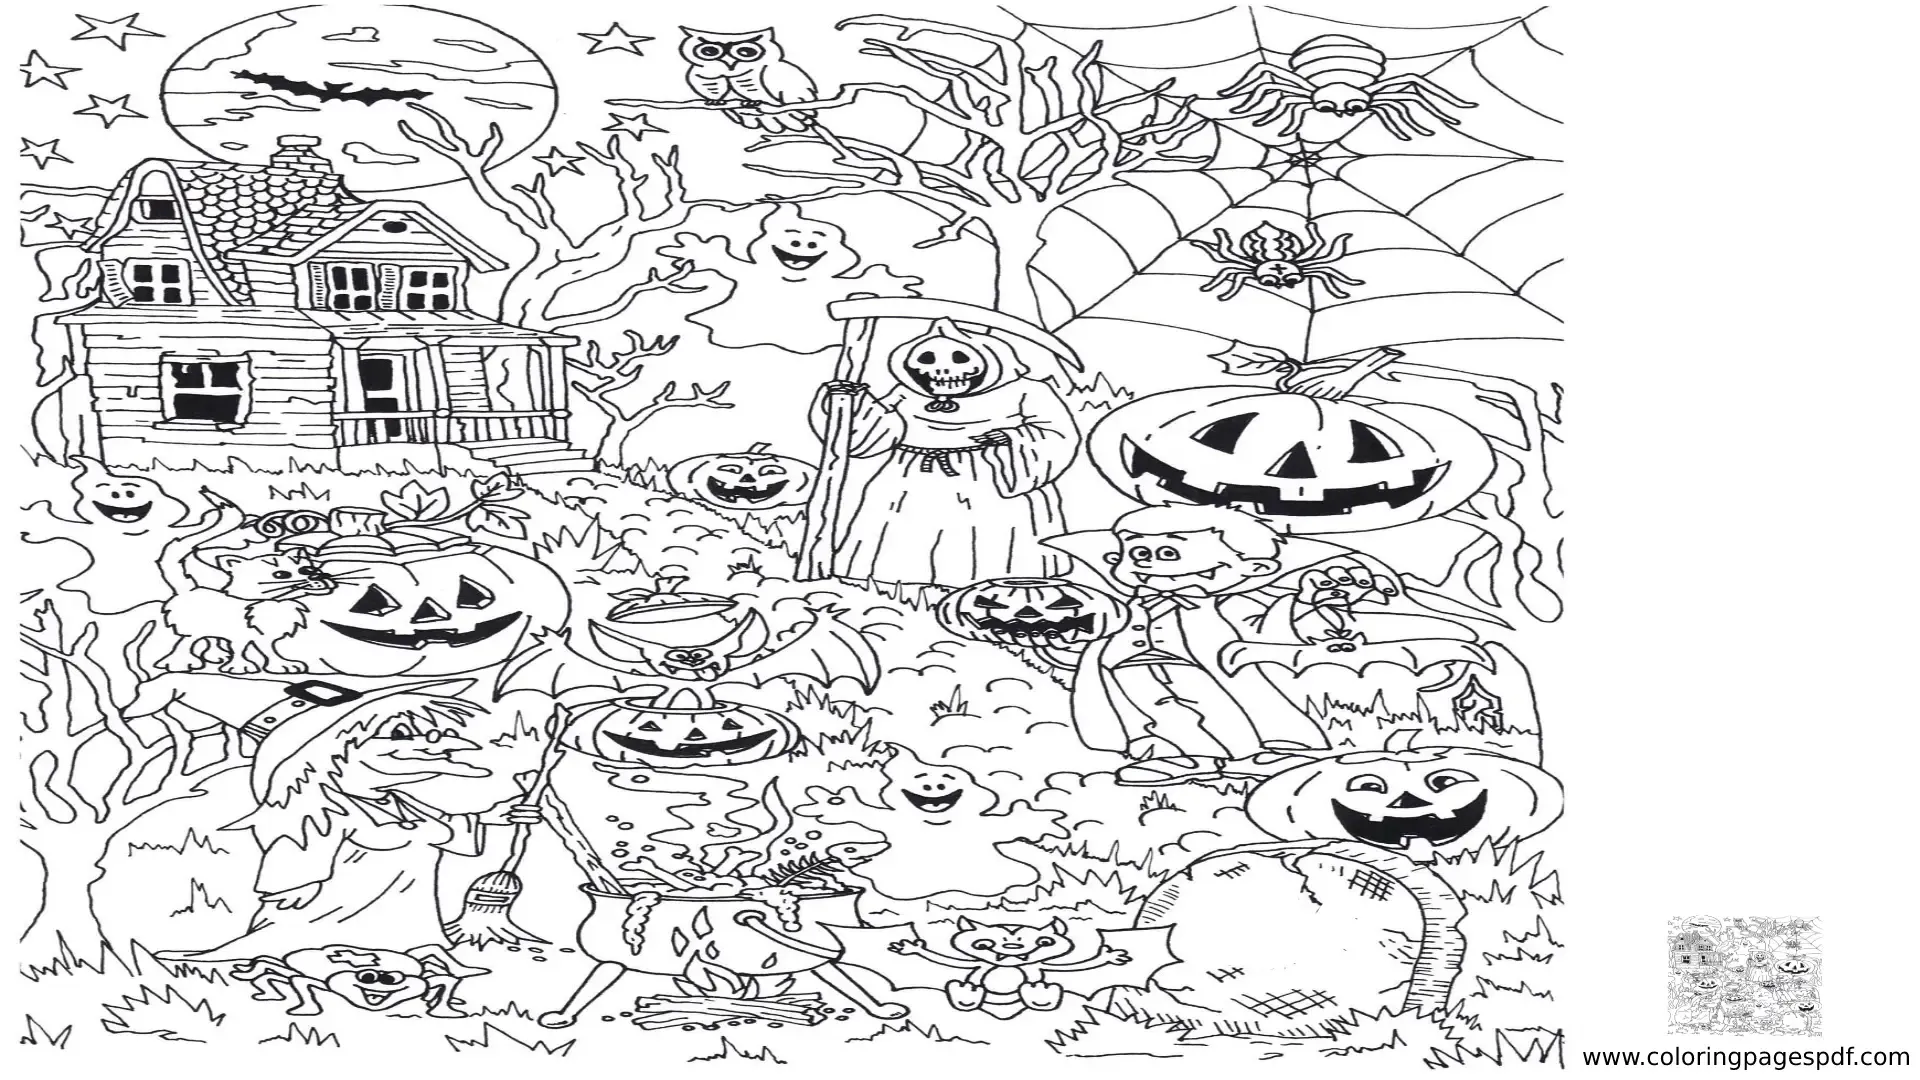 Coloring Page Of A Haunted House On Halloween